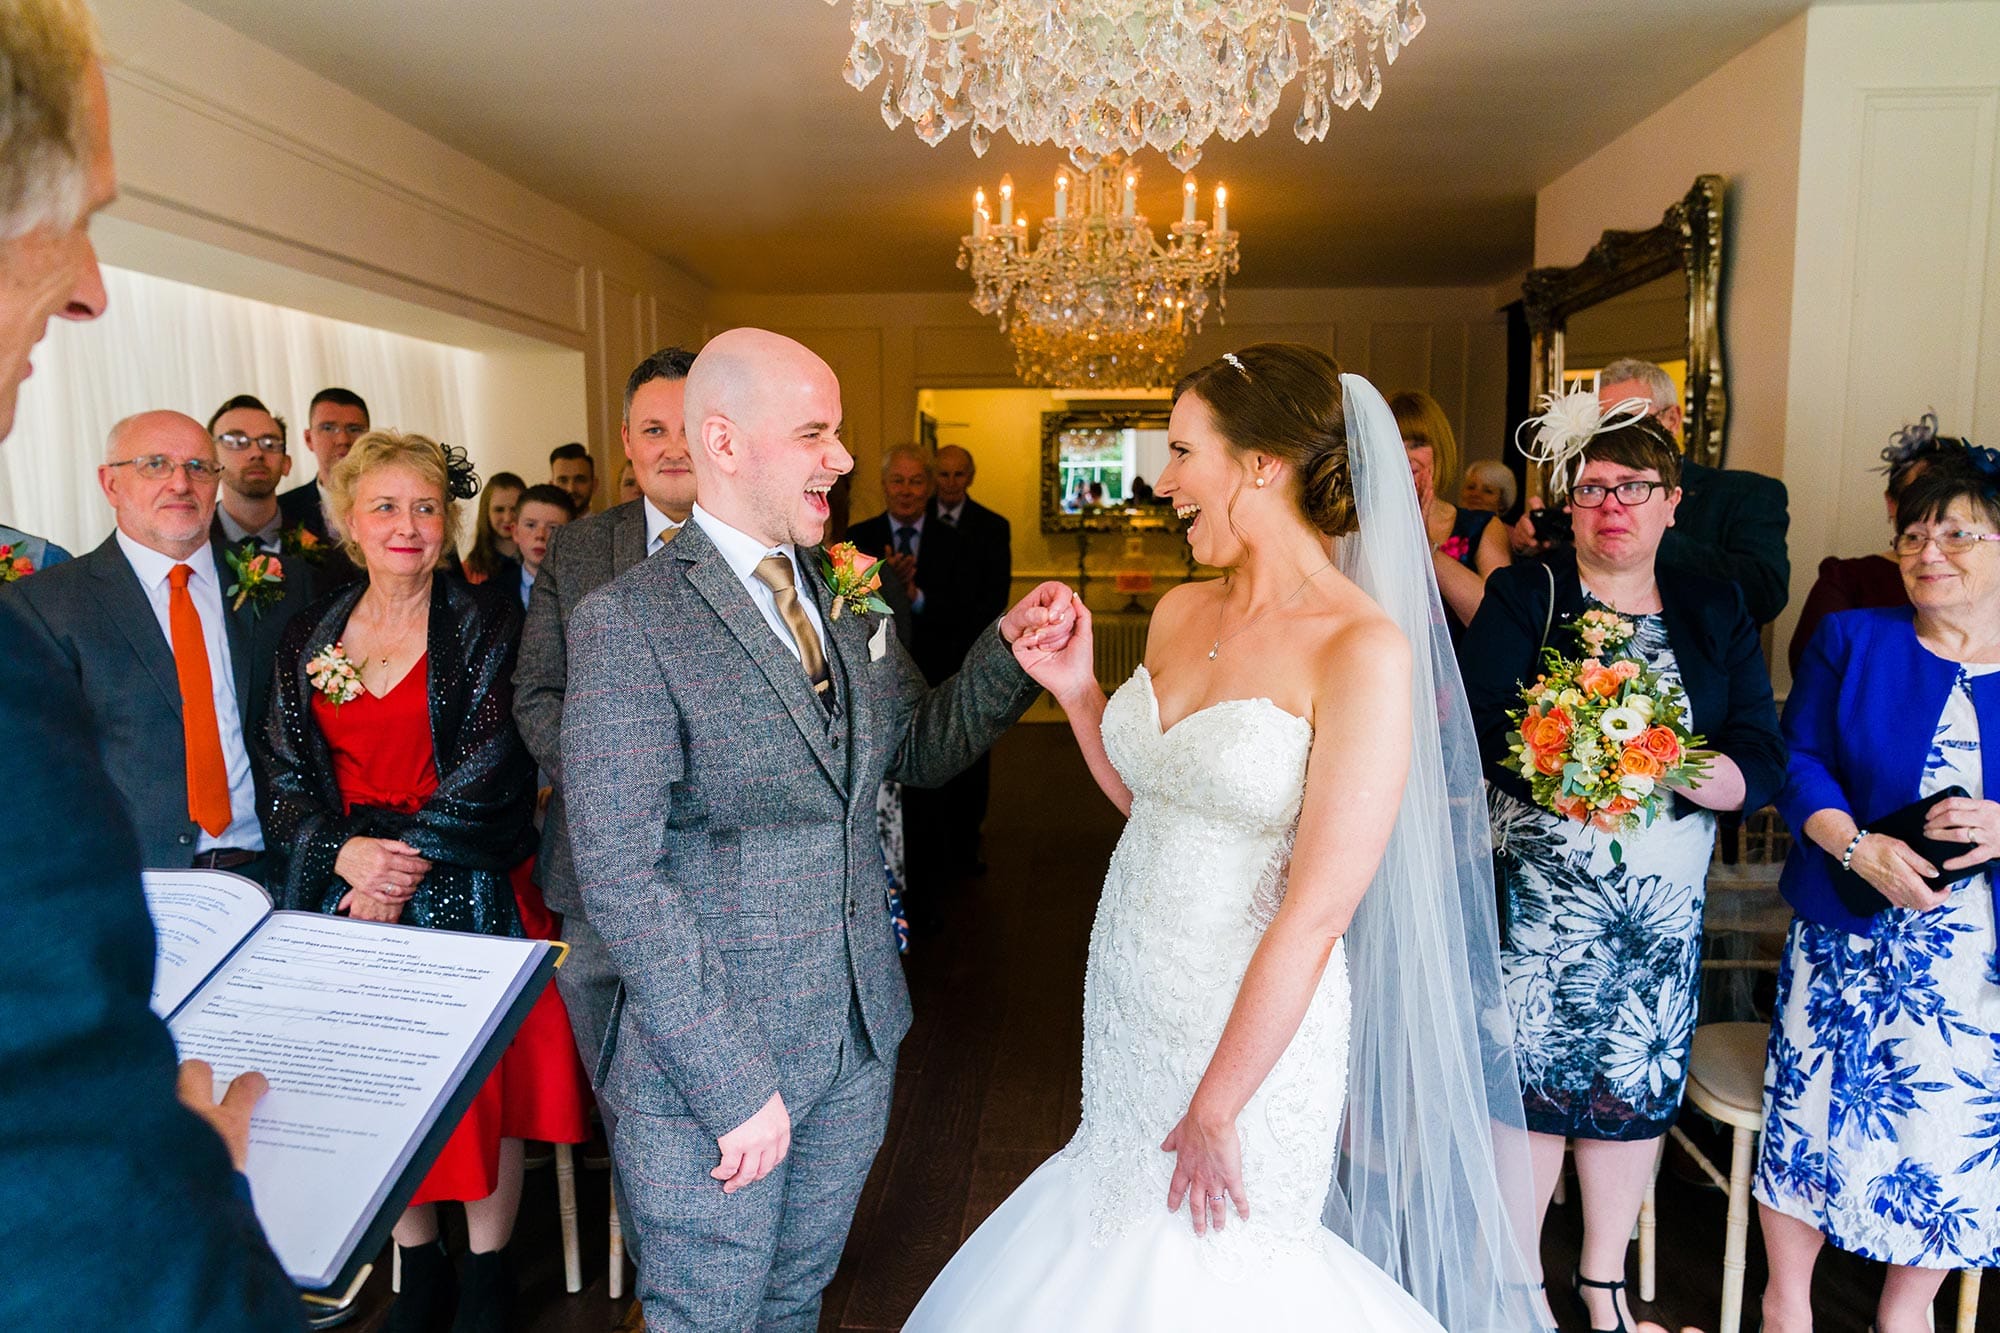 A wedding photo taken at Old Vicarage in Nottingham of the Bride and groom cheering just after the registrar prounounces them husband and wife, whilst their friends and family look on. Mother of bride's face is red from all the crying during the ceremony.